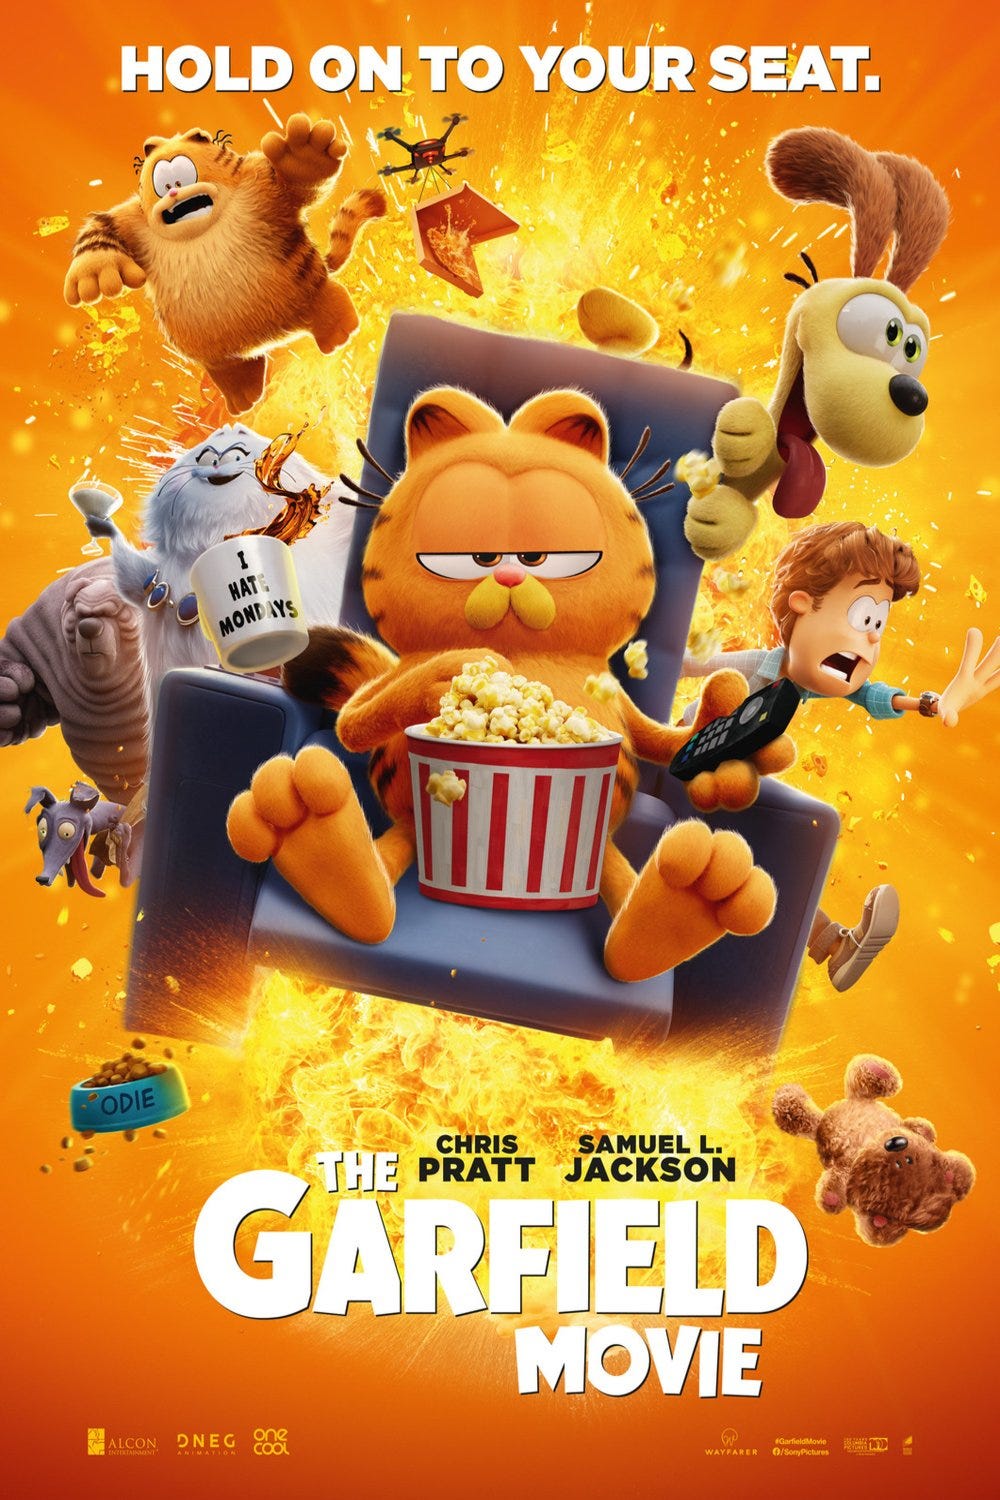 https://www.cinemaclock.com/images/posters/1000x1500/39/the-garfield-movie-2024-us-poster.jpg